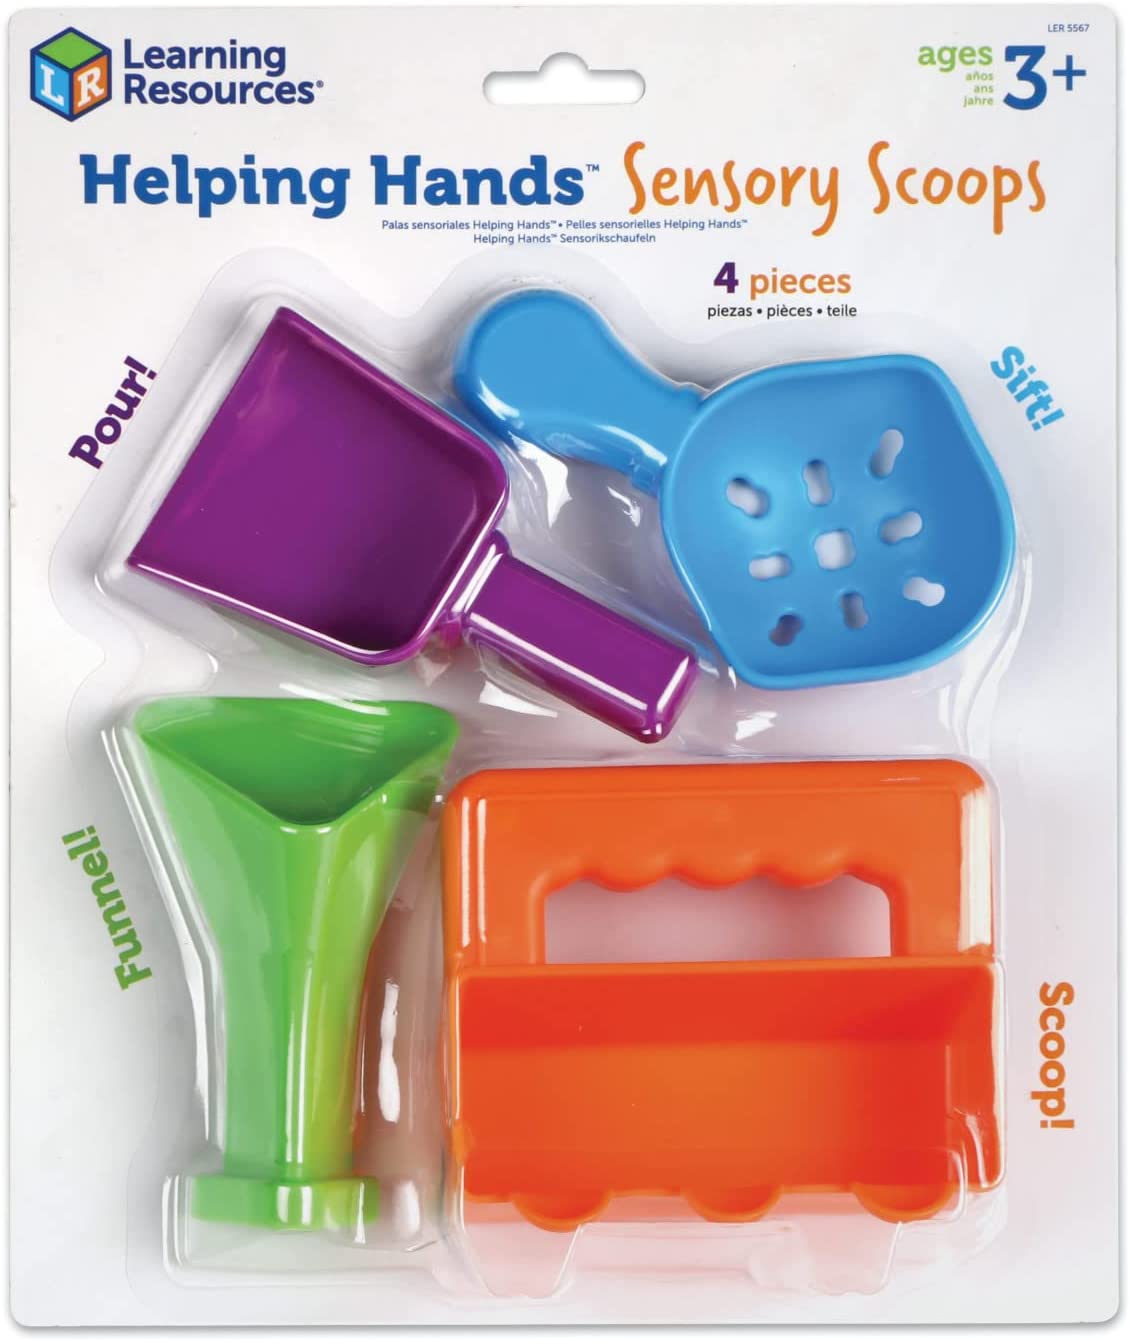 Learning Resources Helping Hands Sensory Scoops, 4 Pieces, Ages 3+, fine Motor Skills, Sensory Toys for Children, Sensory Toys for Toddlers, Sensory bin